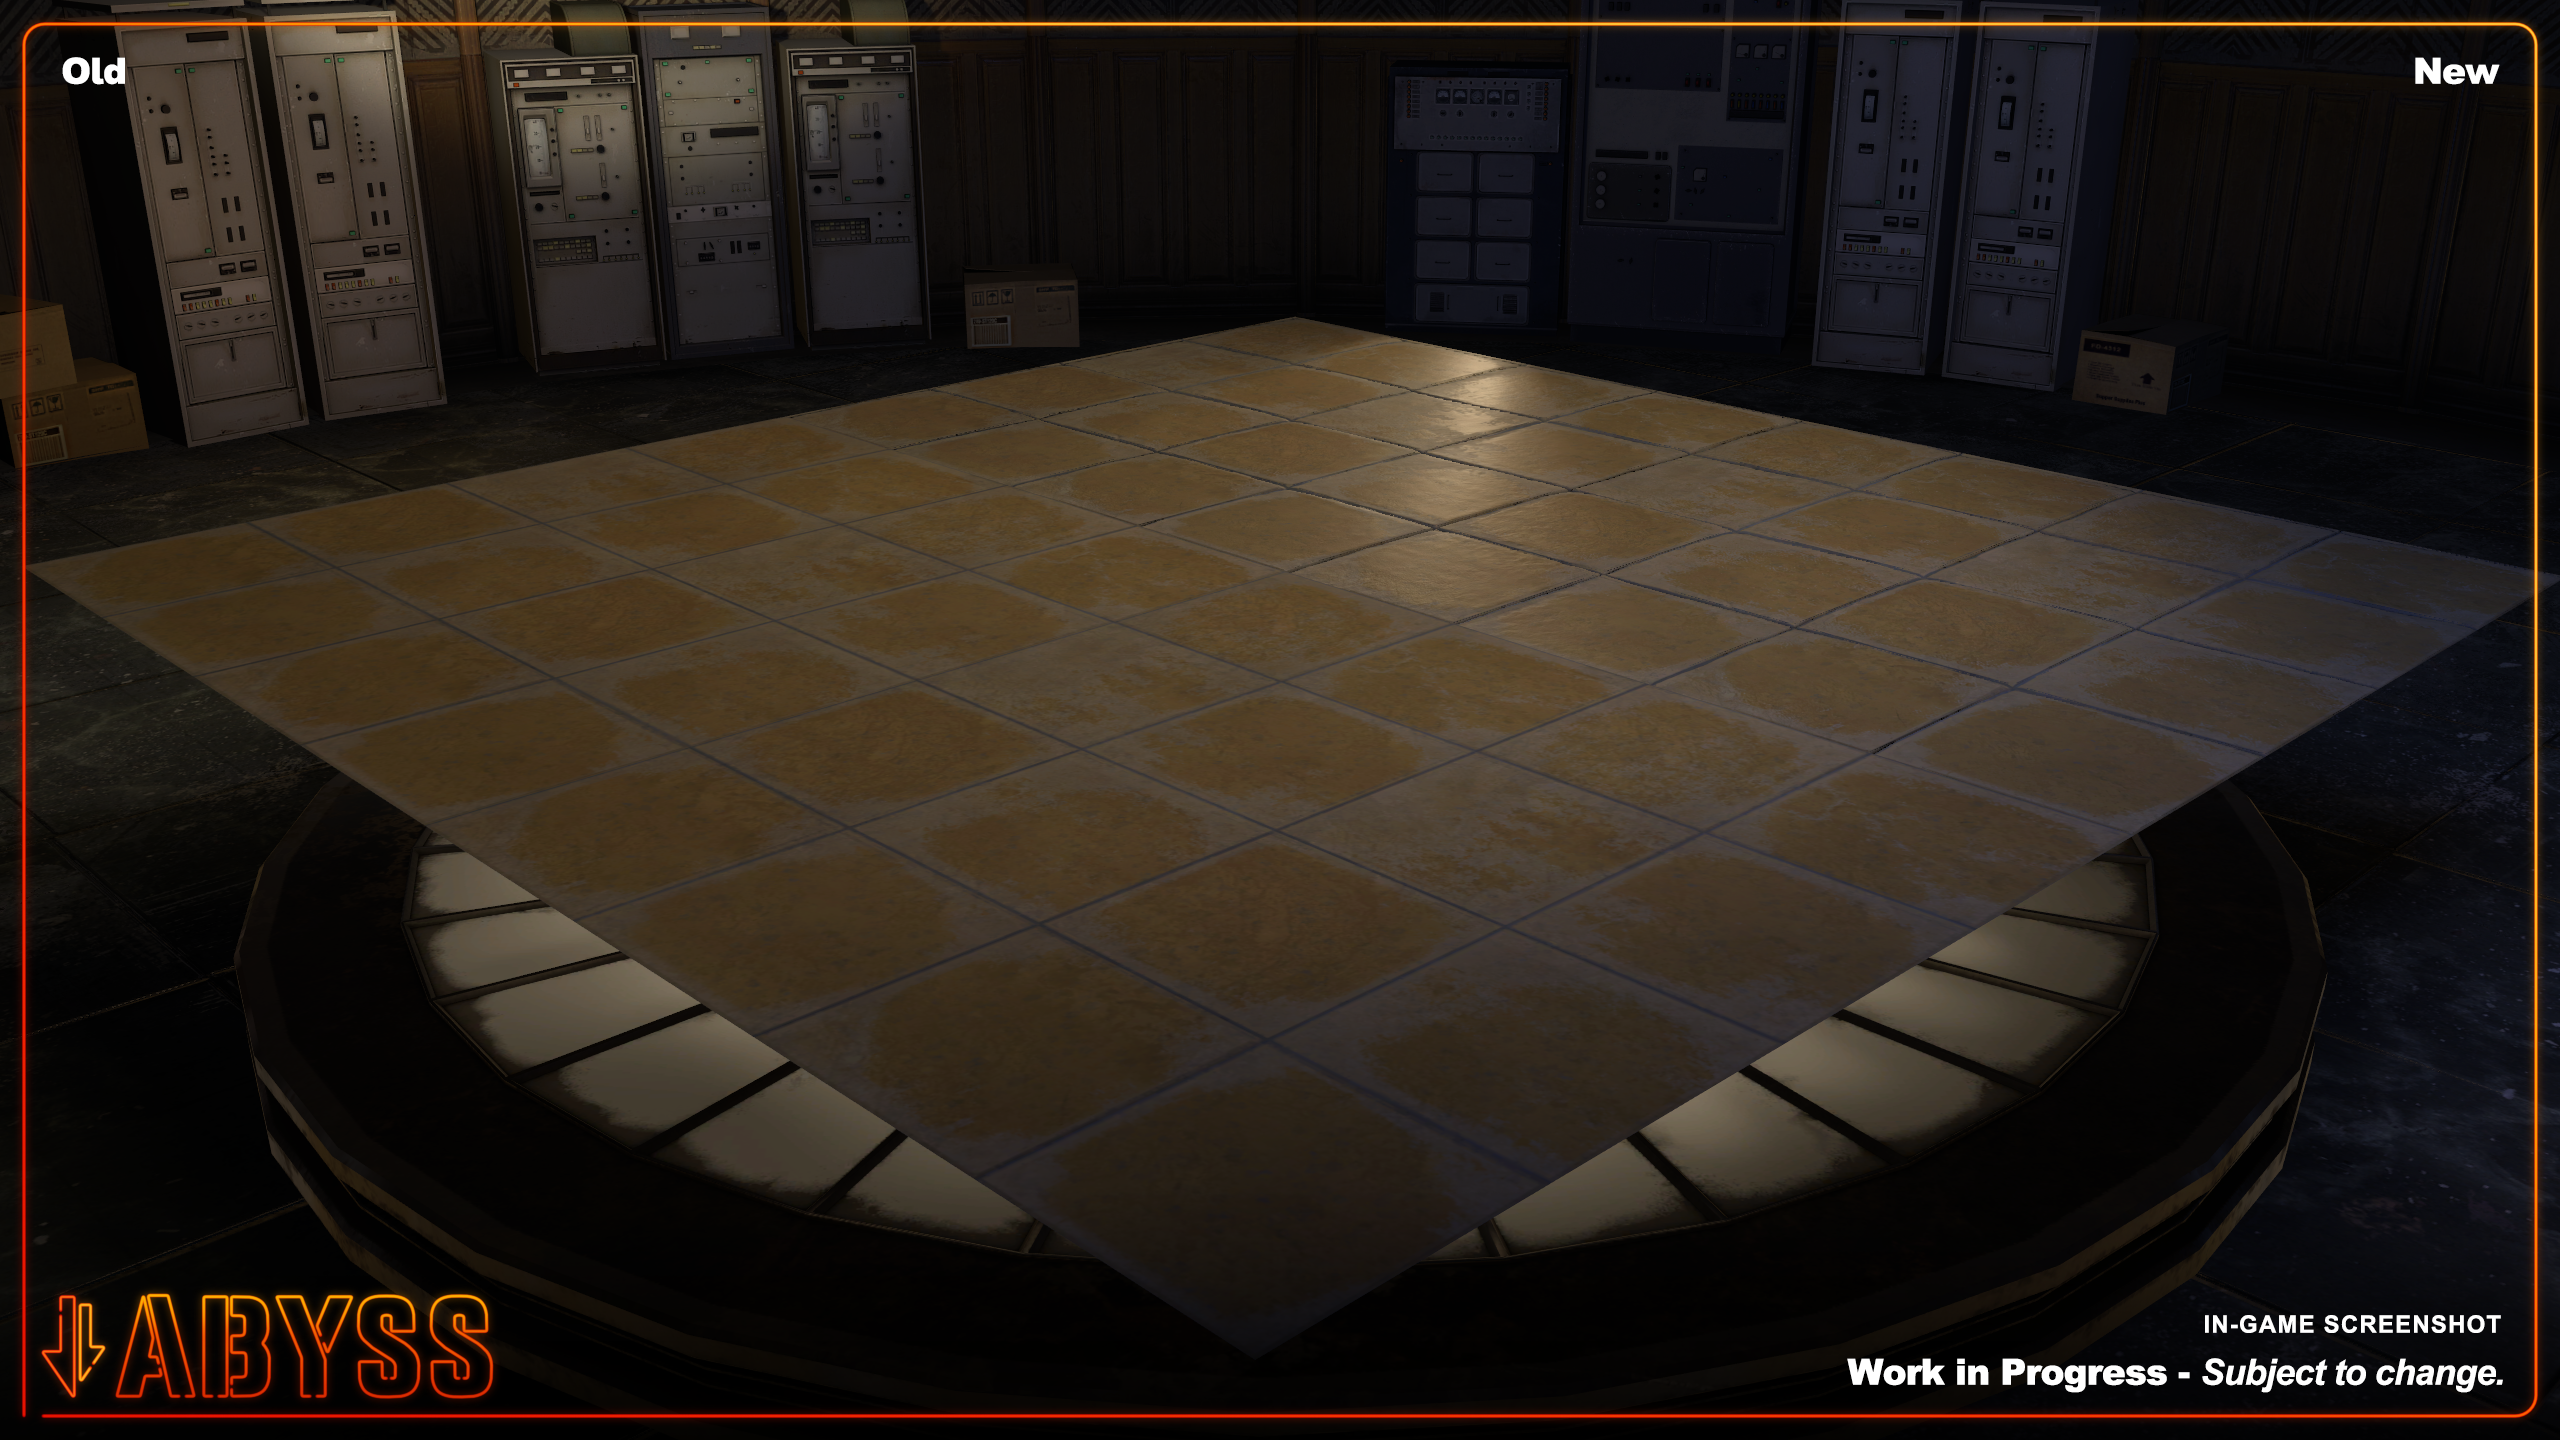 A comparison between an office floor tile texture from Portal 2 and the Abyss remaster.